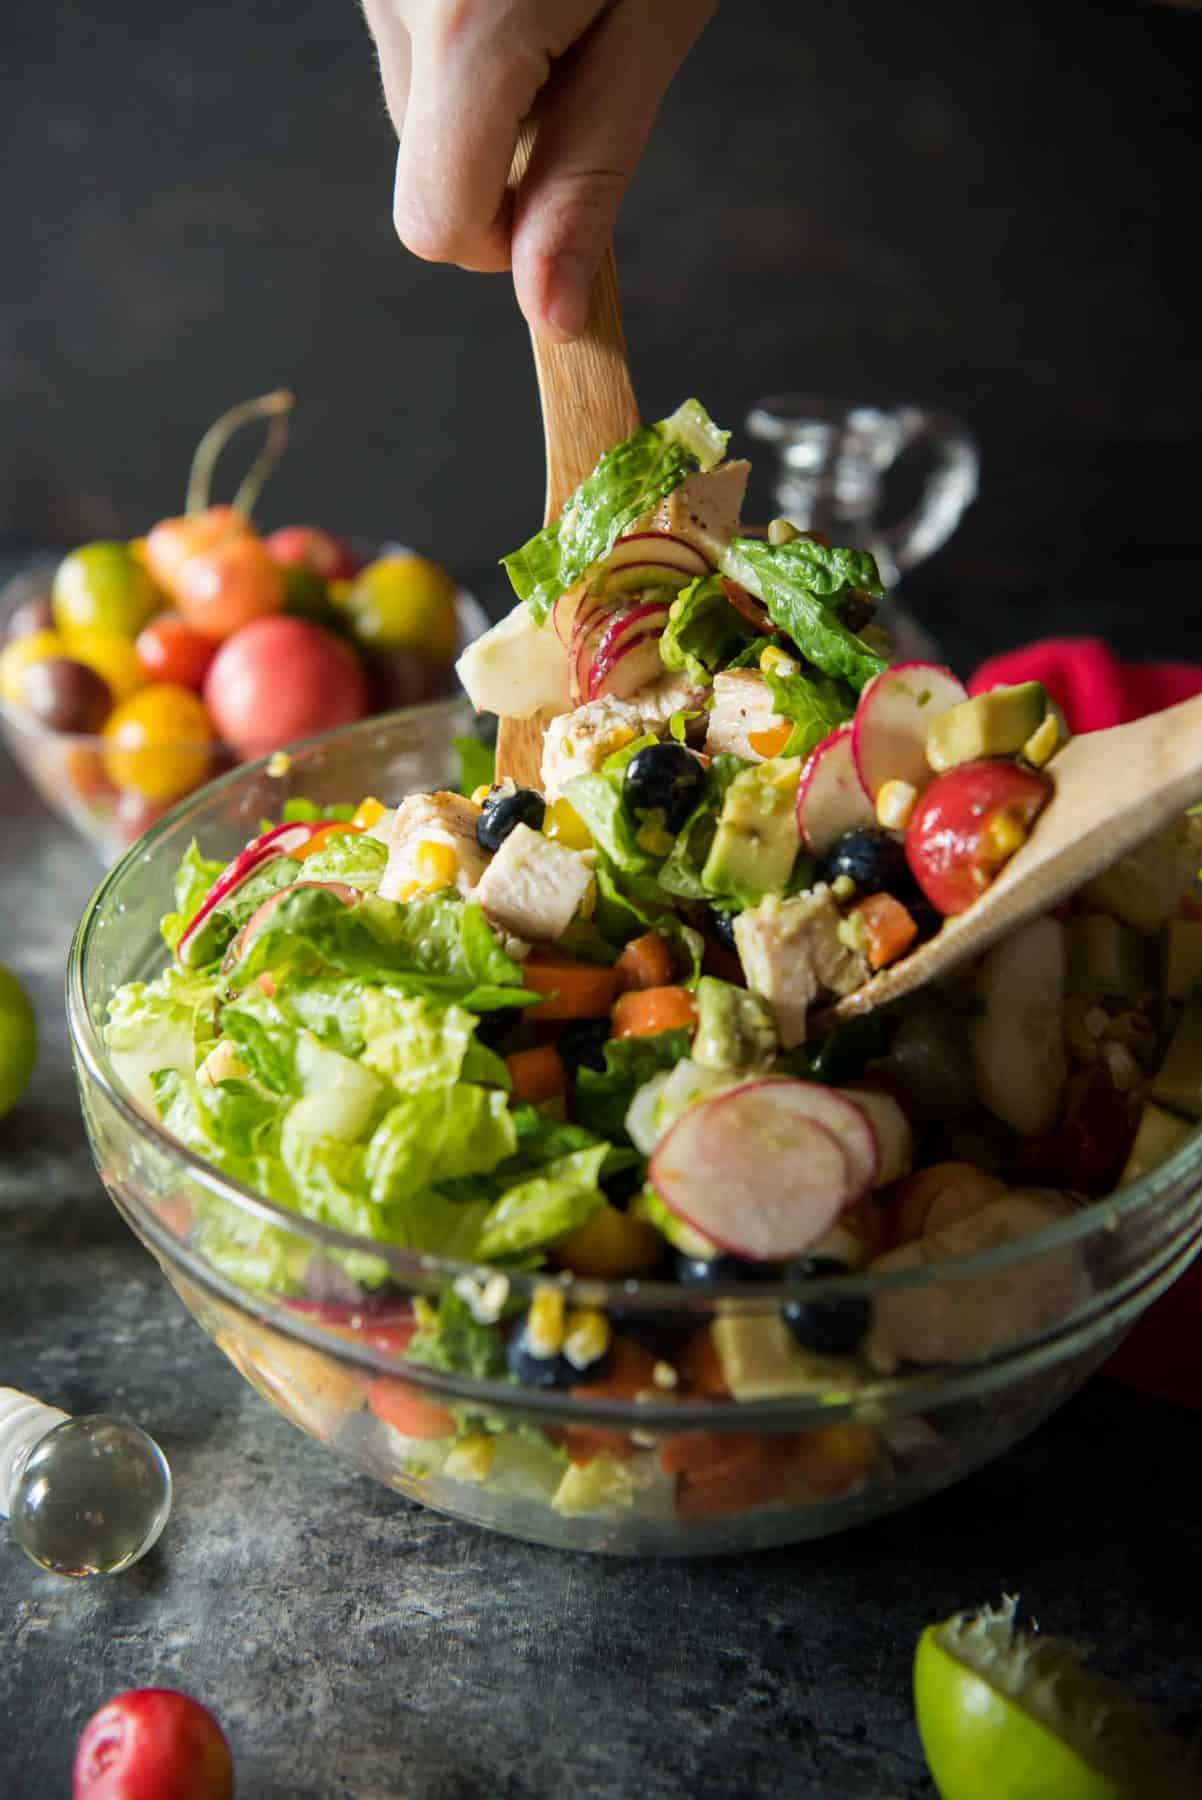 Summer lovin' in a salad! Grilled chicken, grilled corn, fresh cherries, blueberries, and avocado are tossed with standard salad fare and a tangy lime vinaigrette - creating a crunchy Summer Chopped Salad that's perfect for any meal!